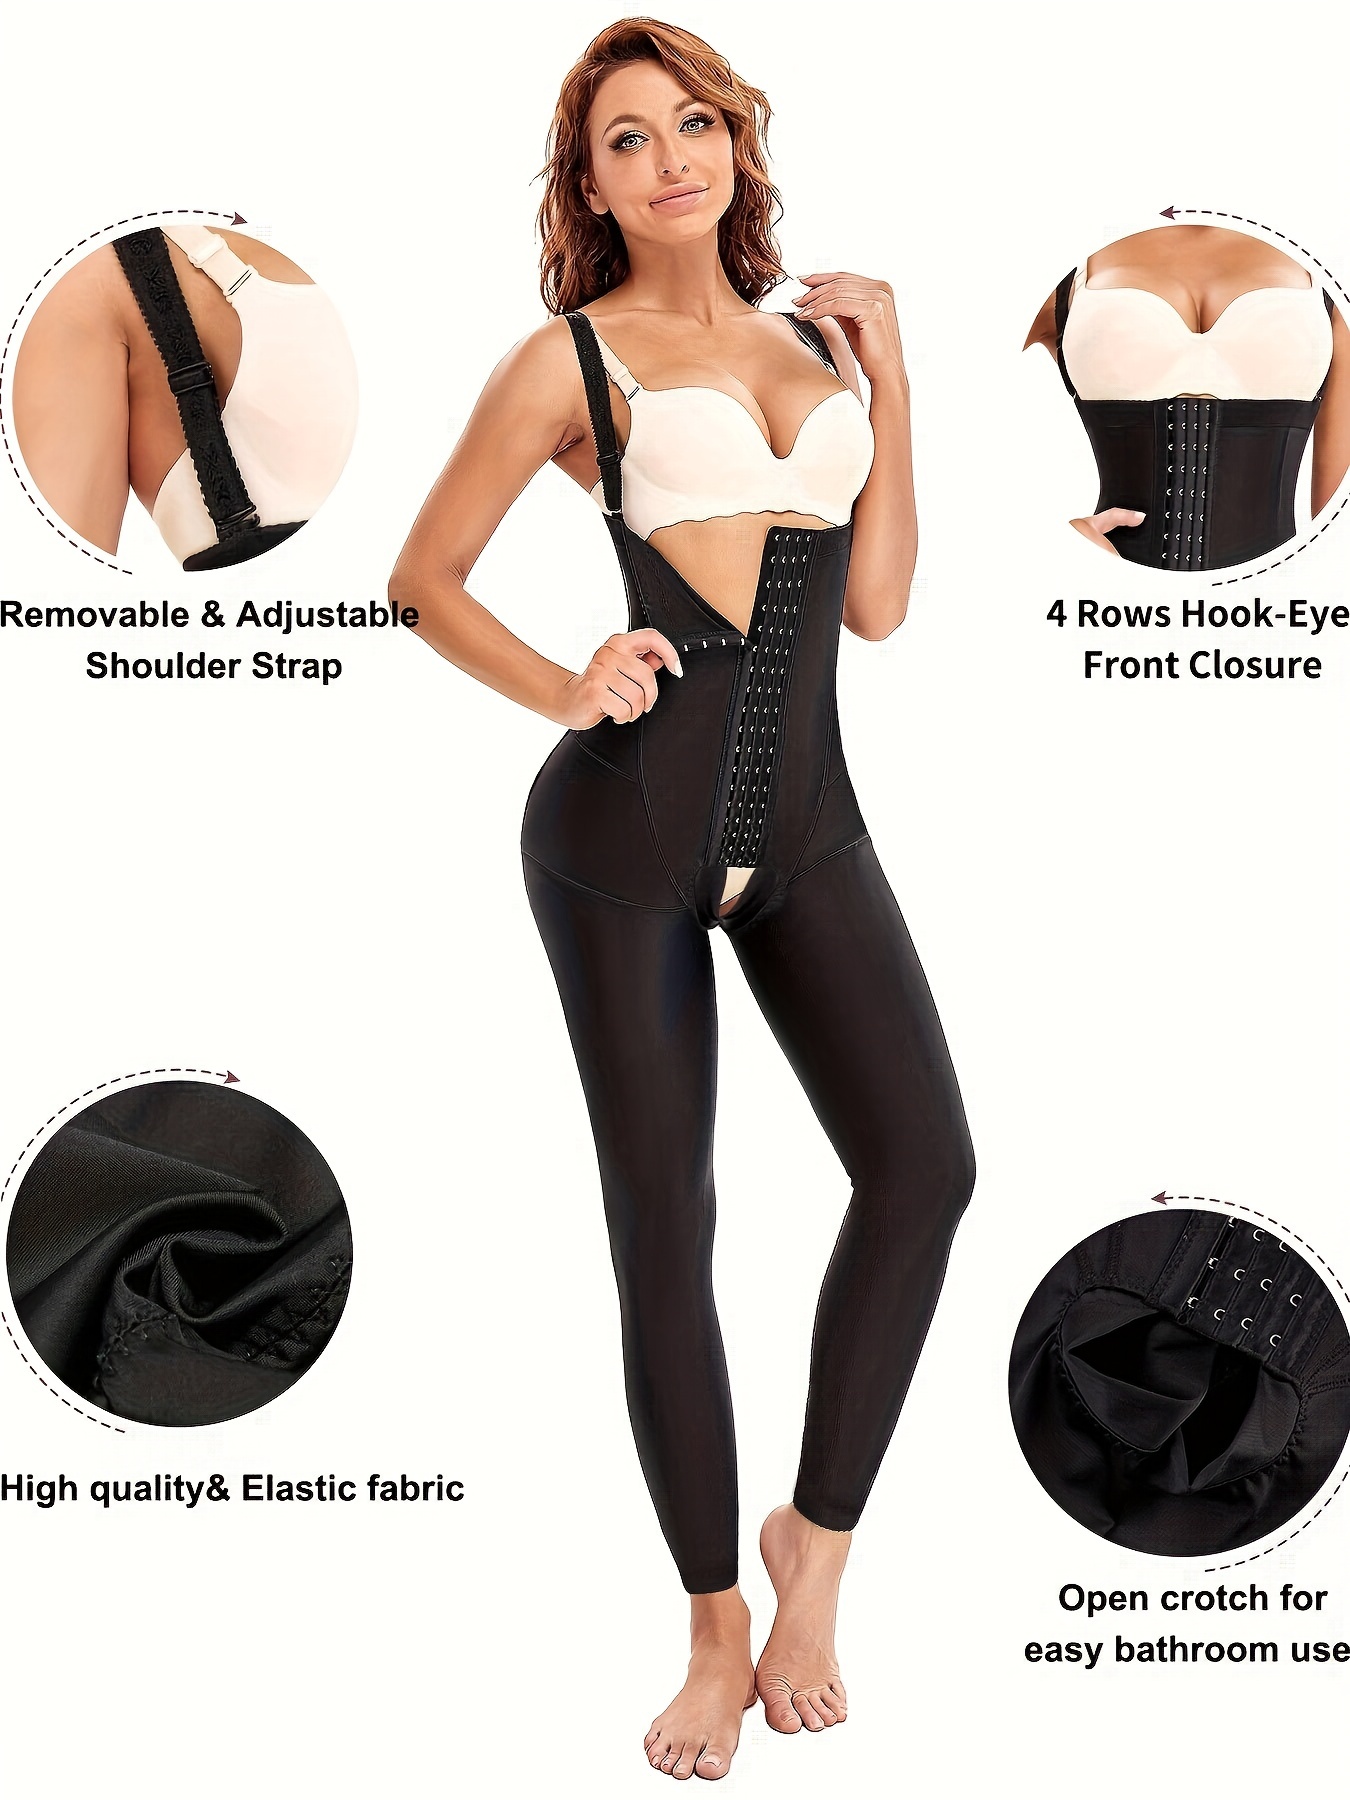 High Compression Full Body Shapewear With Hook And Eye Front